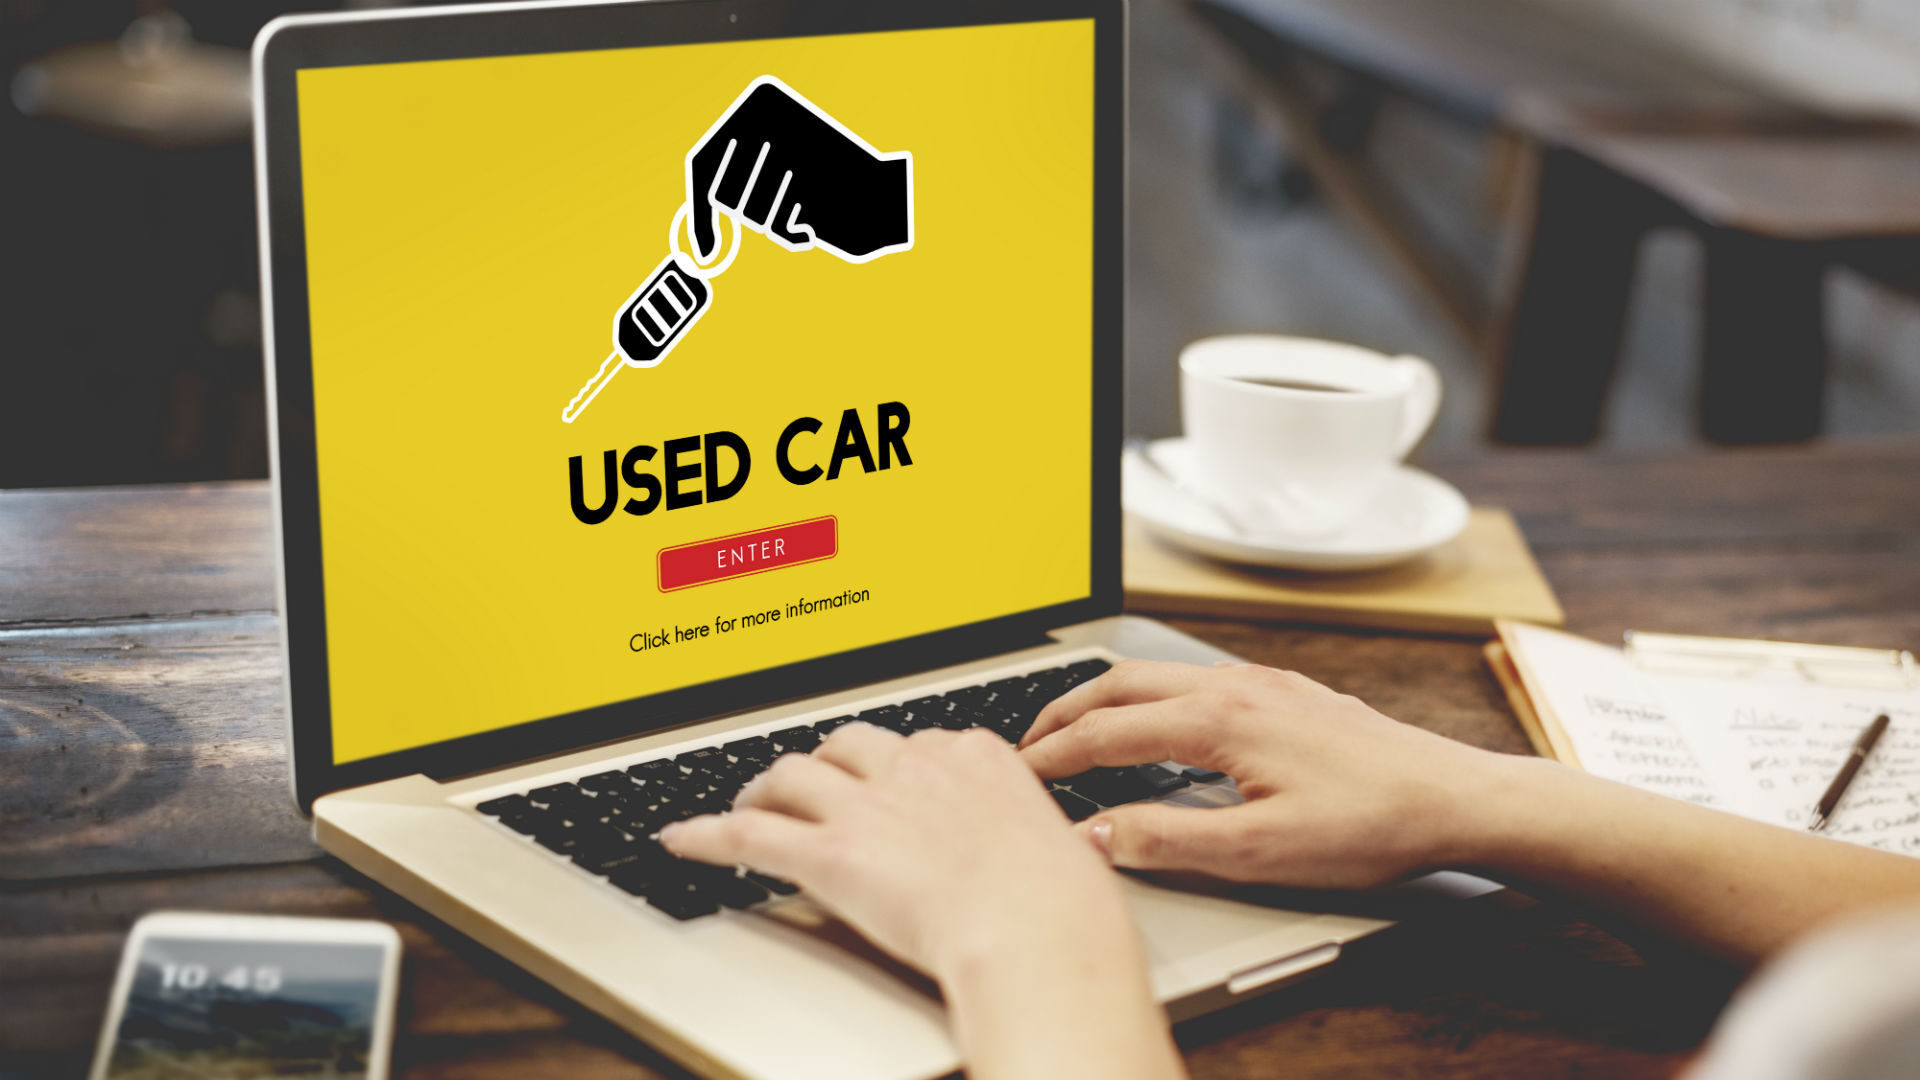 Used car search